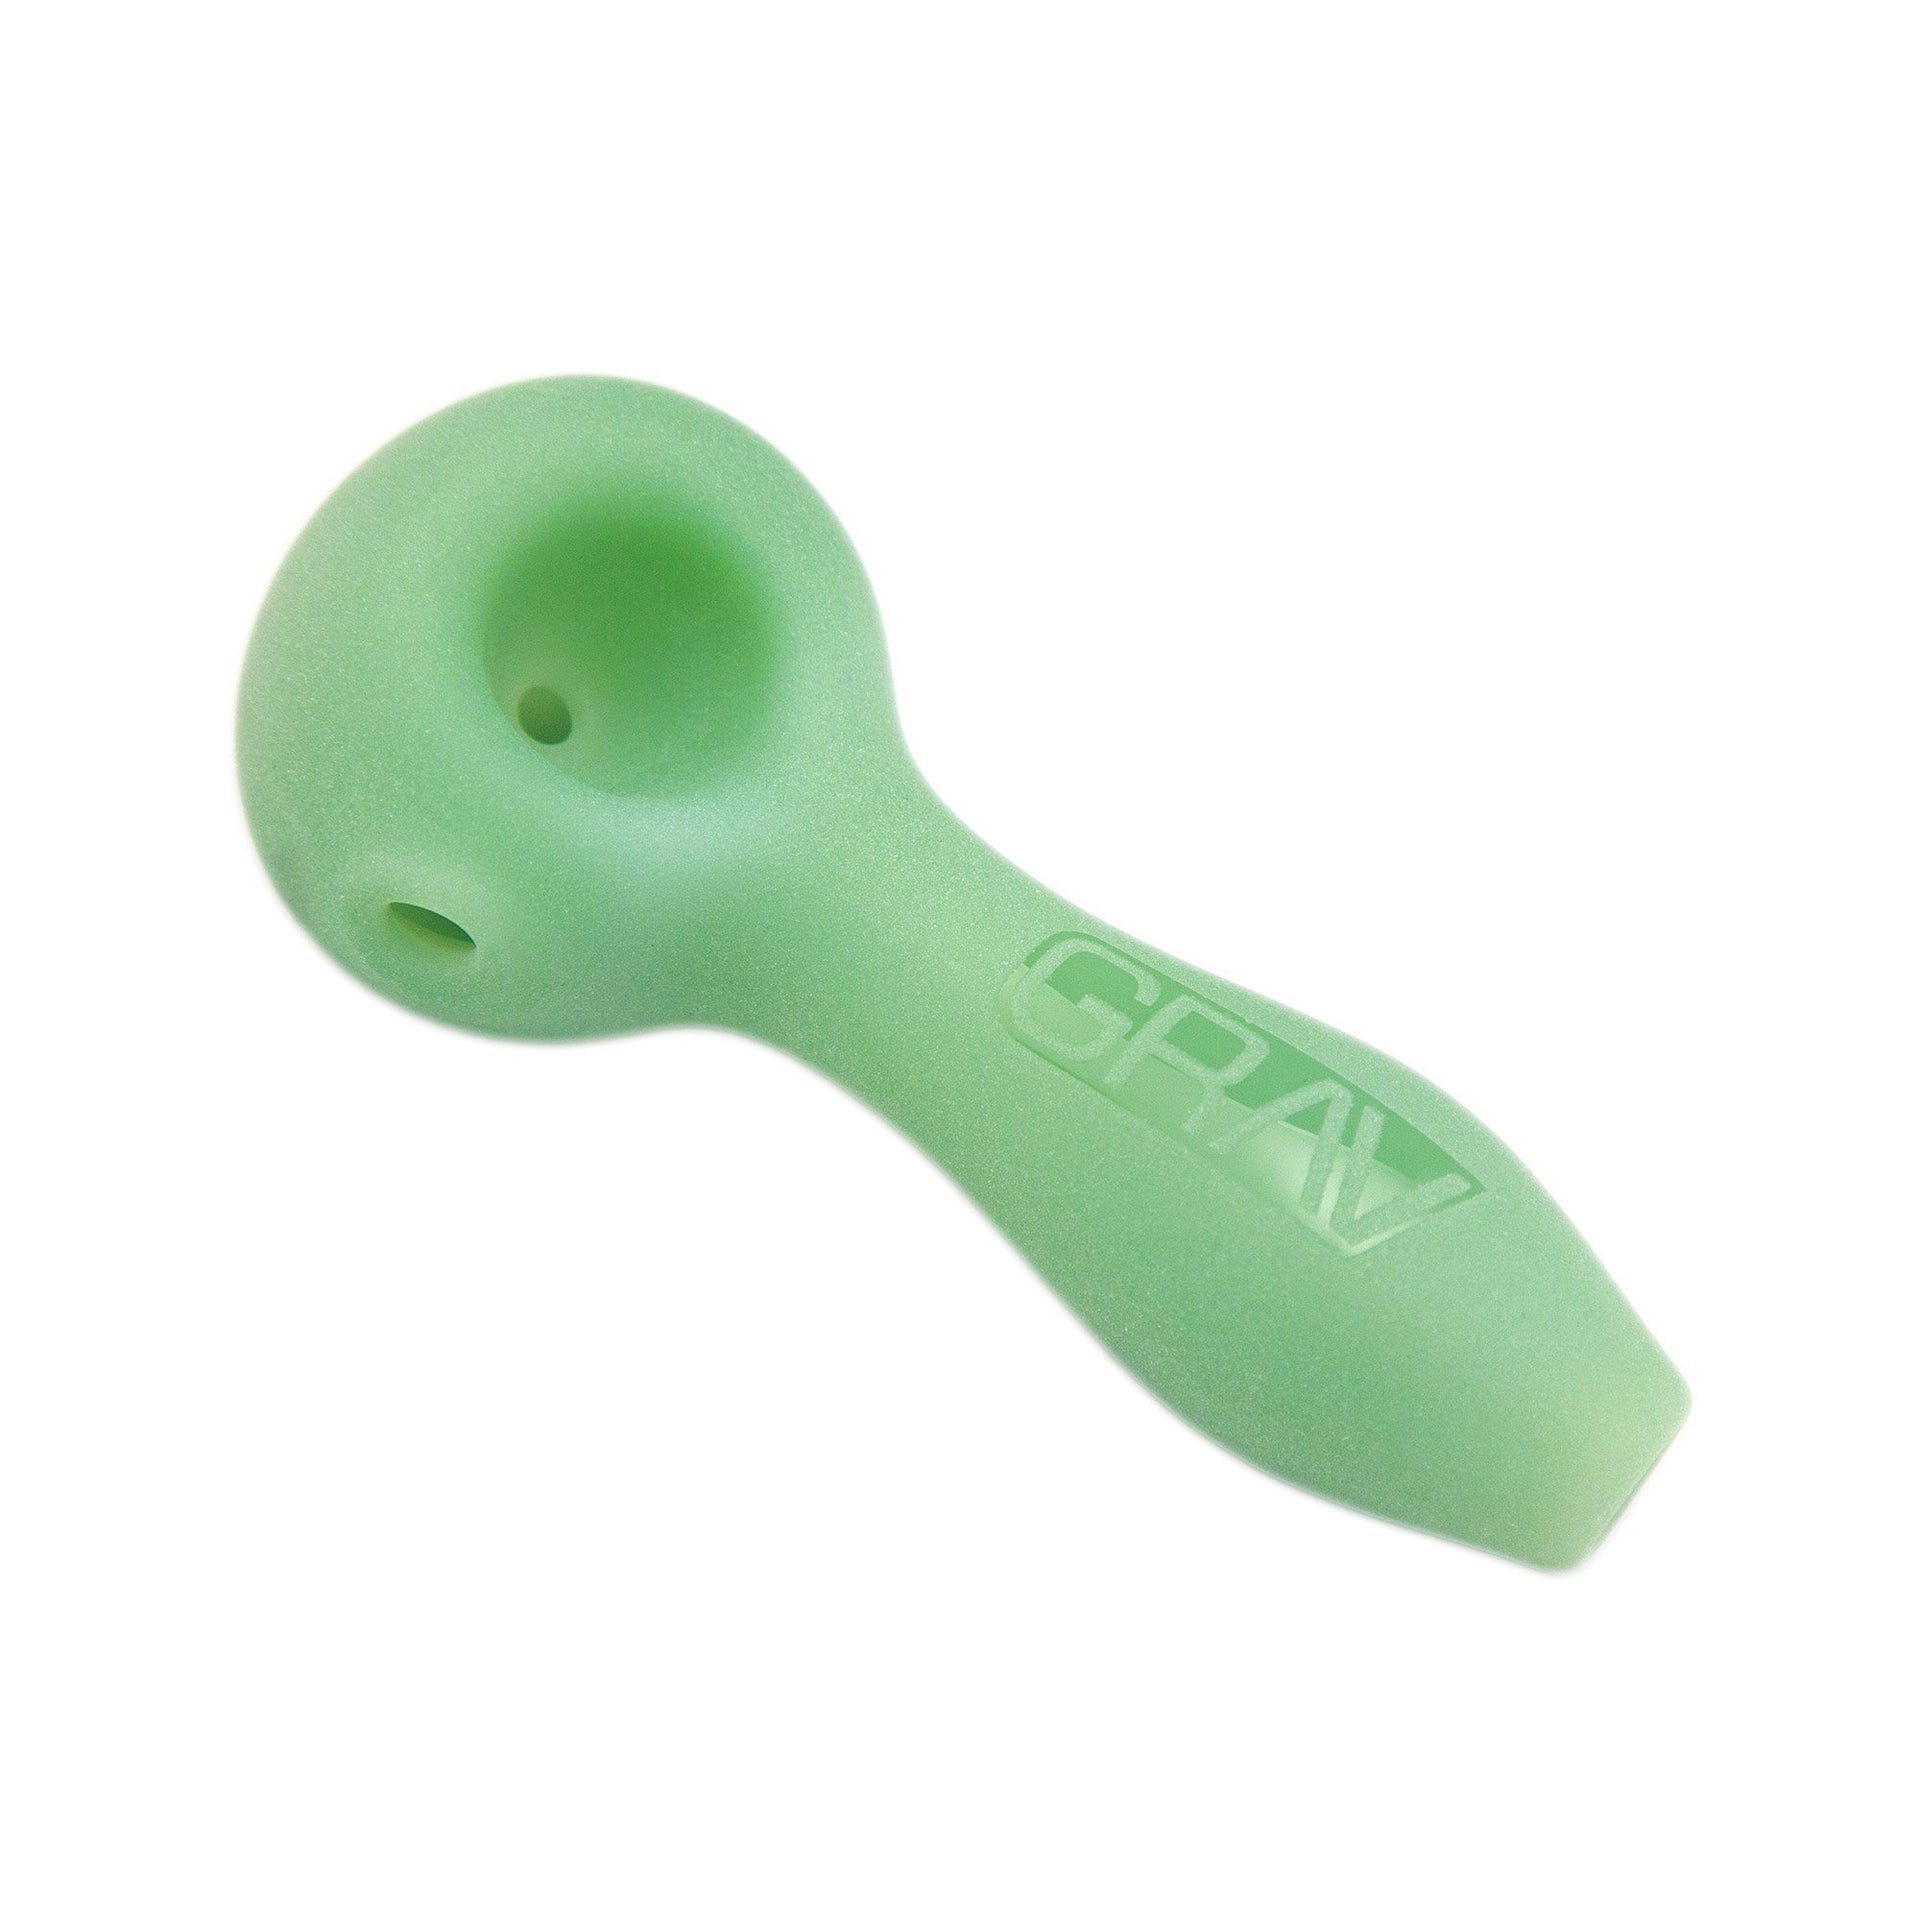 GRAV Sand Blasted Spoon - 420 Science - The most trusted online smoke shop.